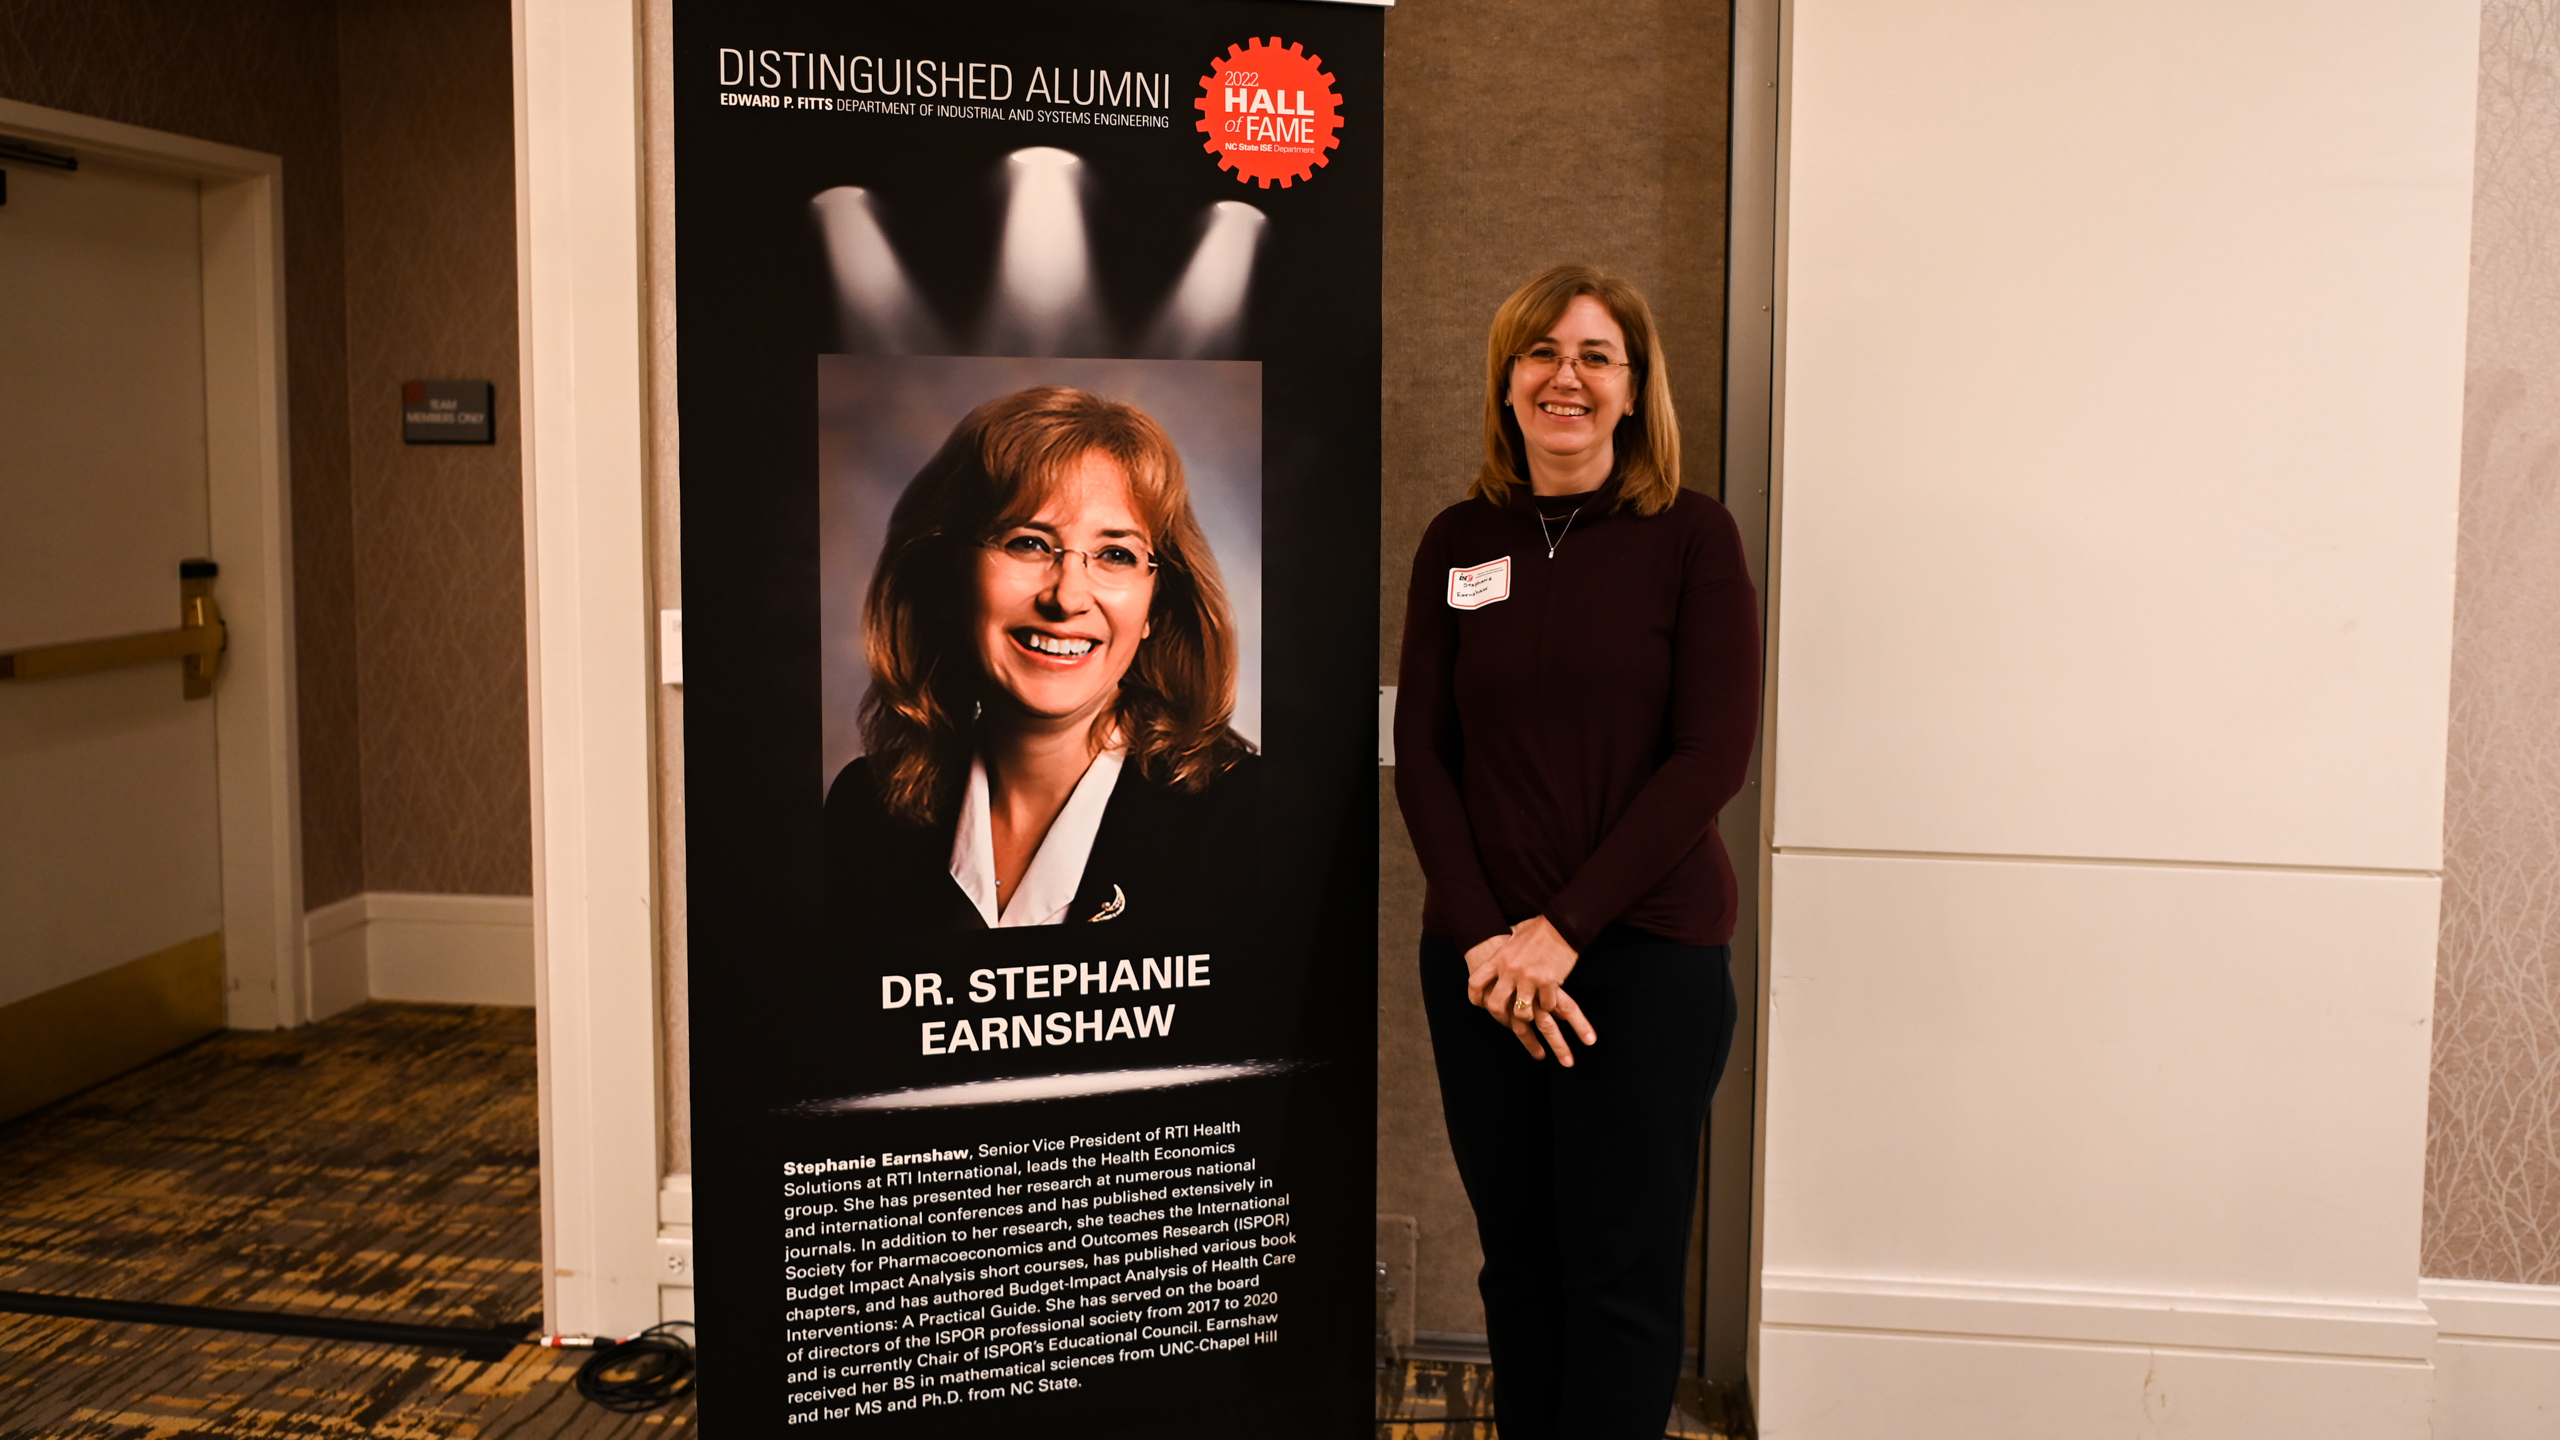 Dr. Stephanie Earnshaw posing in front of her Distinguished Alumni banner